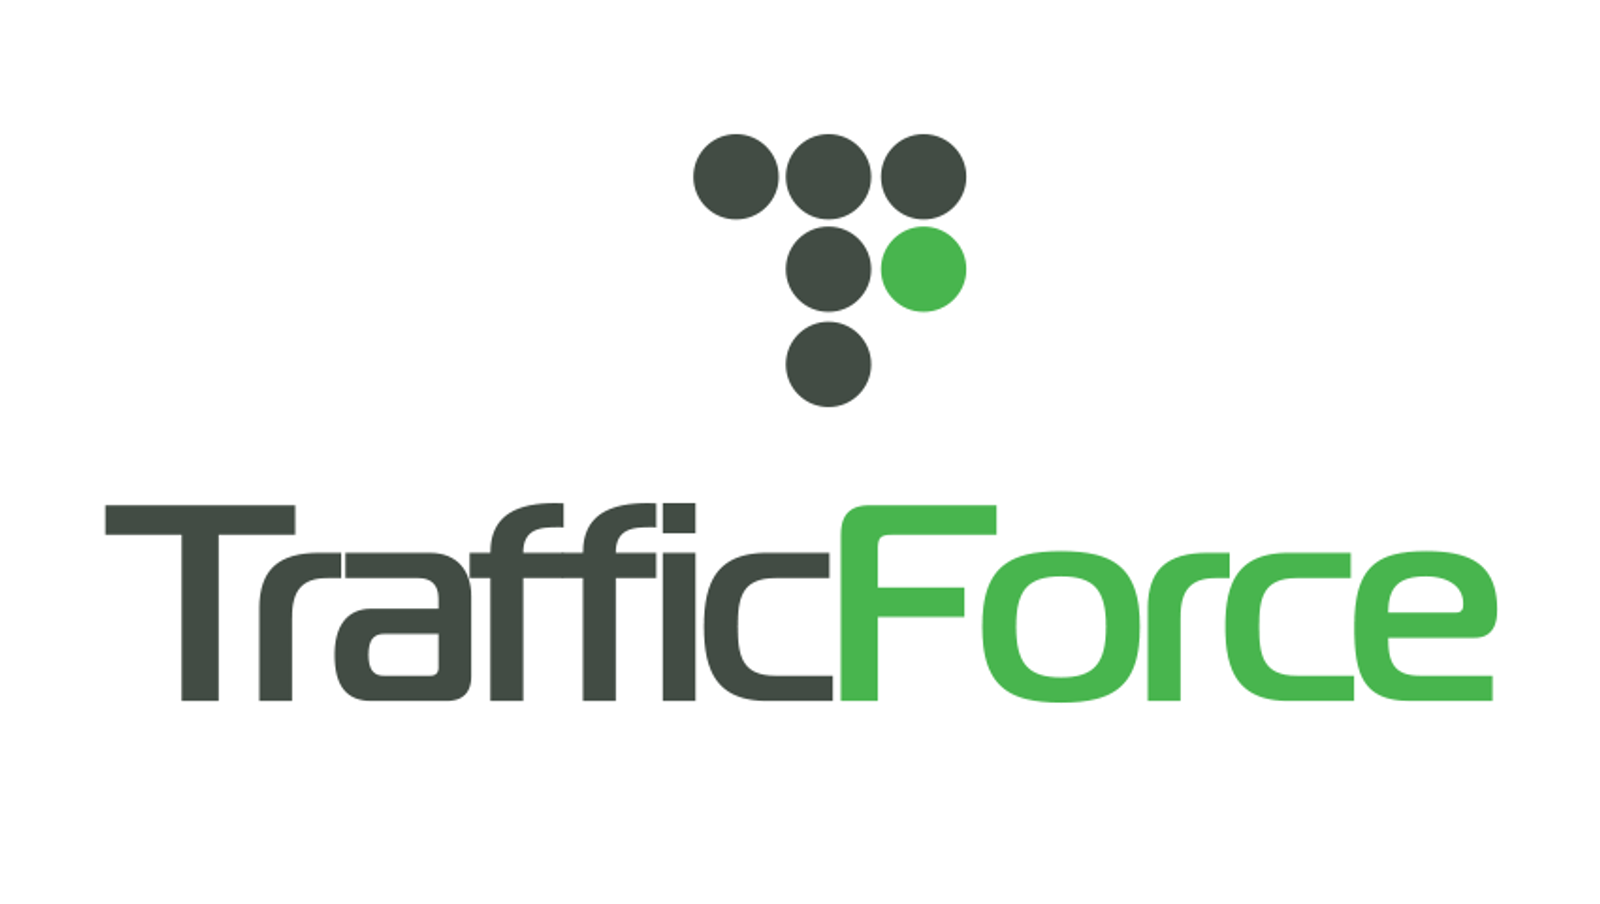 Traffic Force Upgrades With Deeper Analytics, Targeting